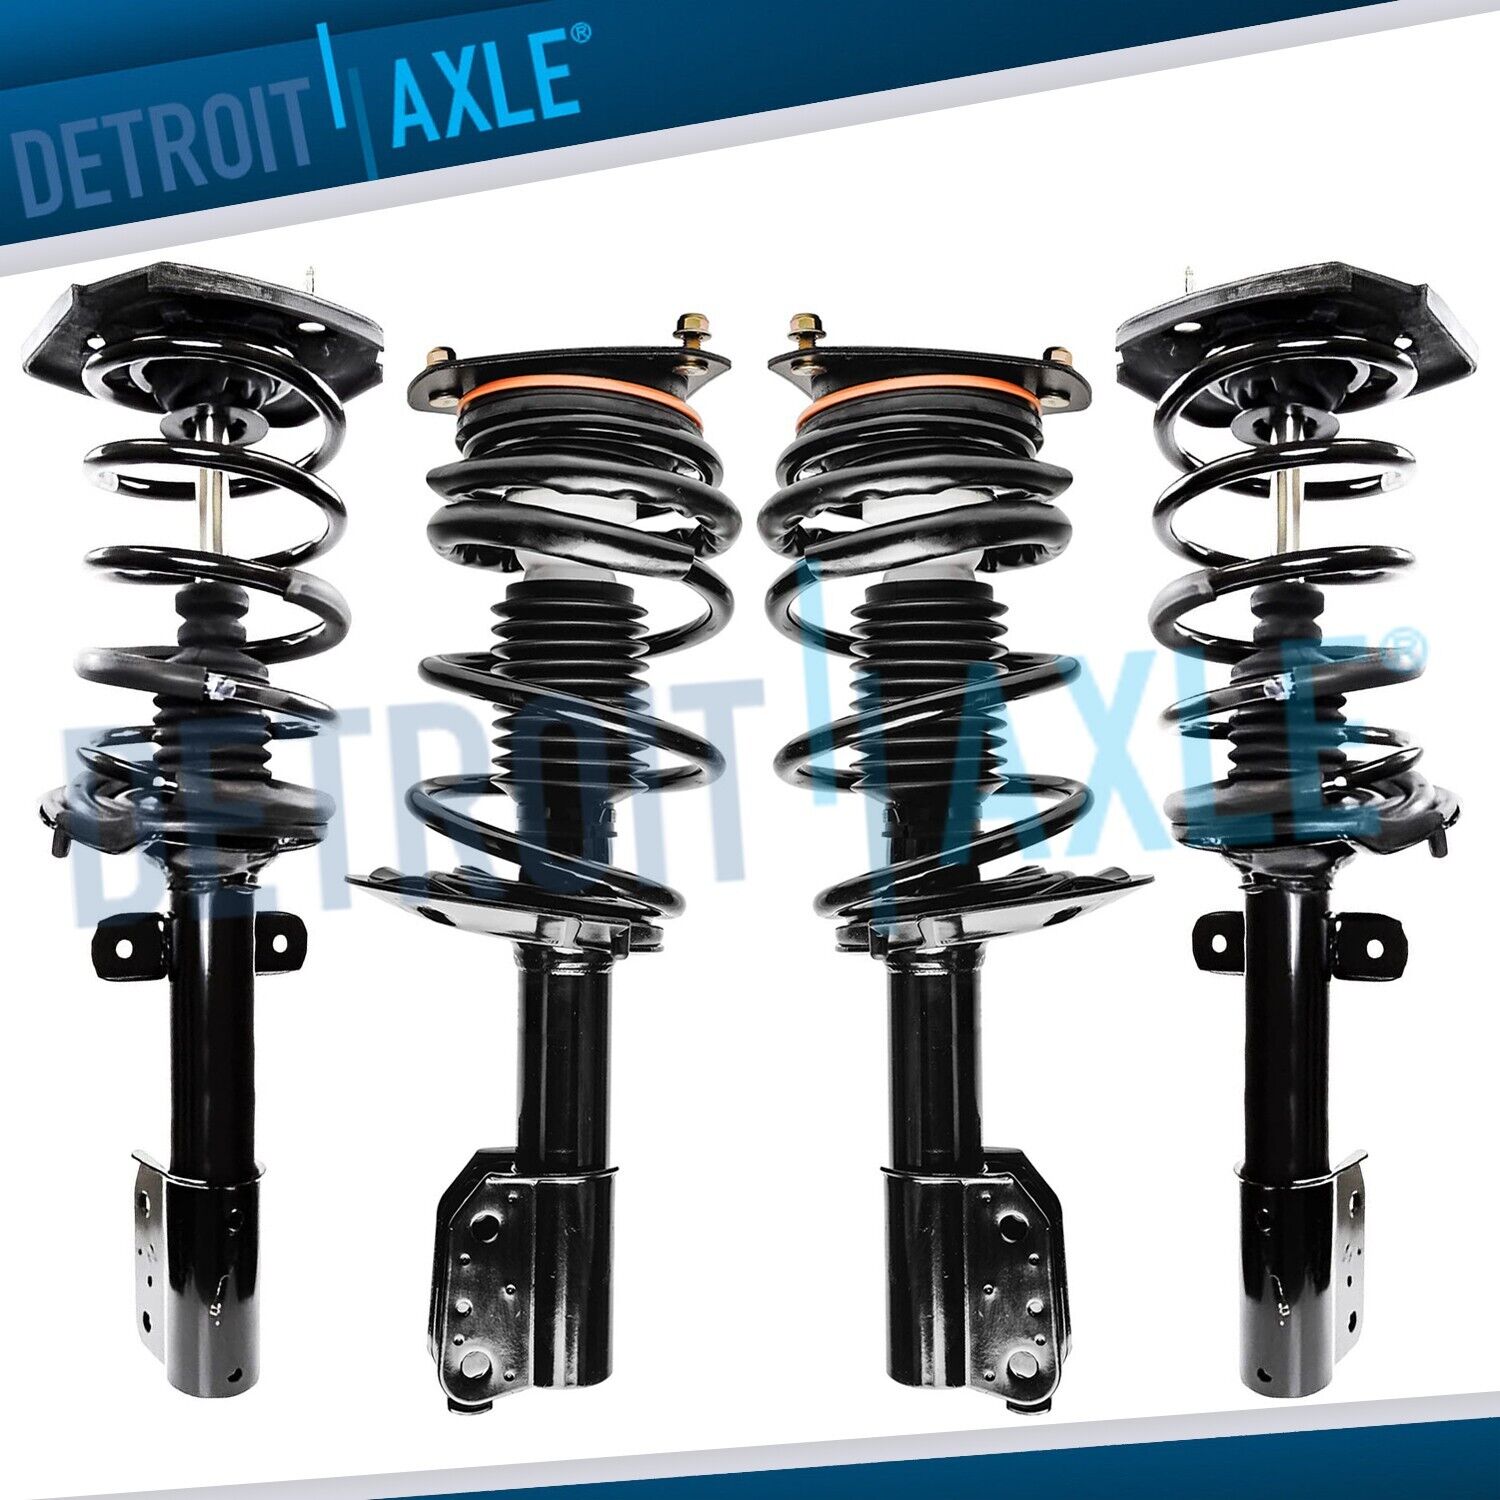 Front & Rear Struts w/Spring Assembly Replacement Kit for Impala LaCrosse Allure